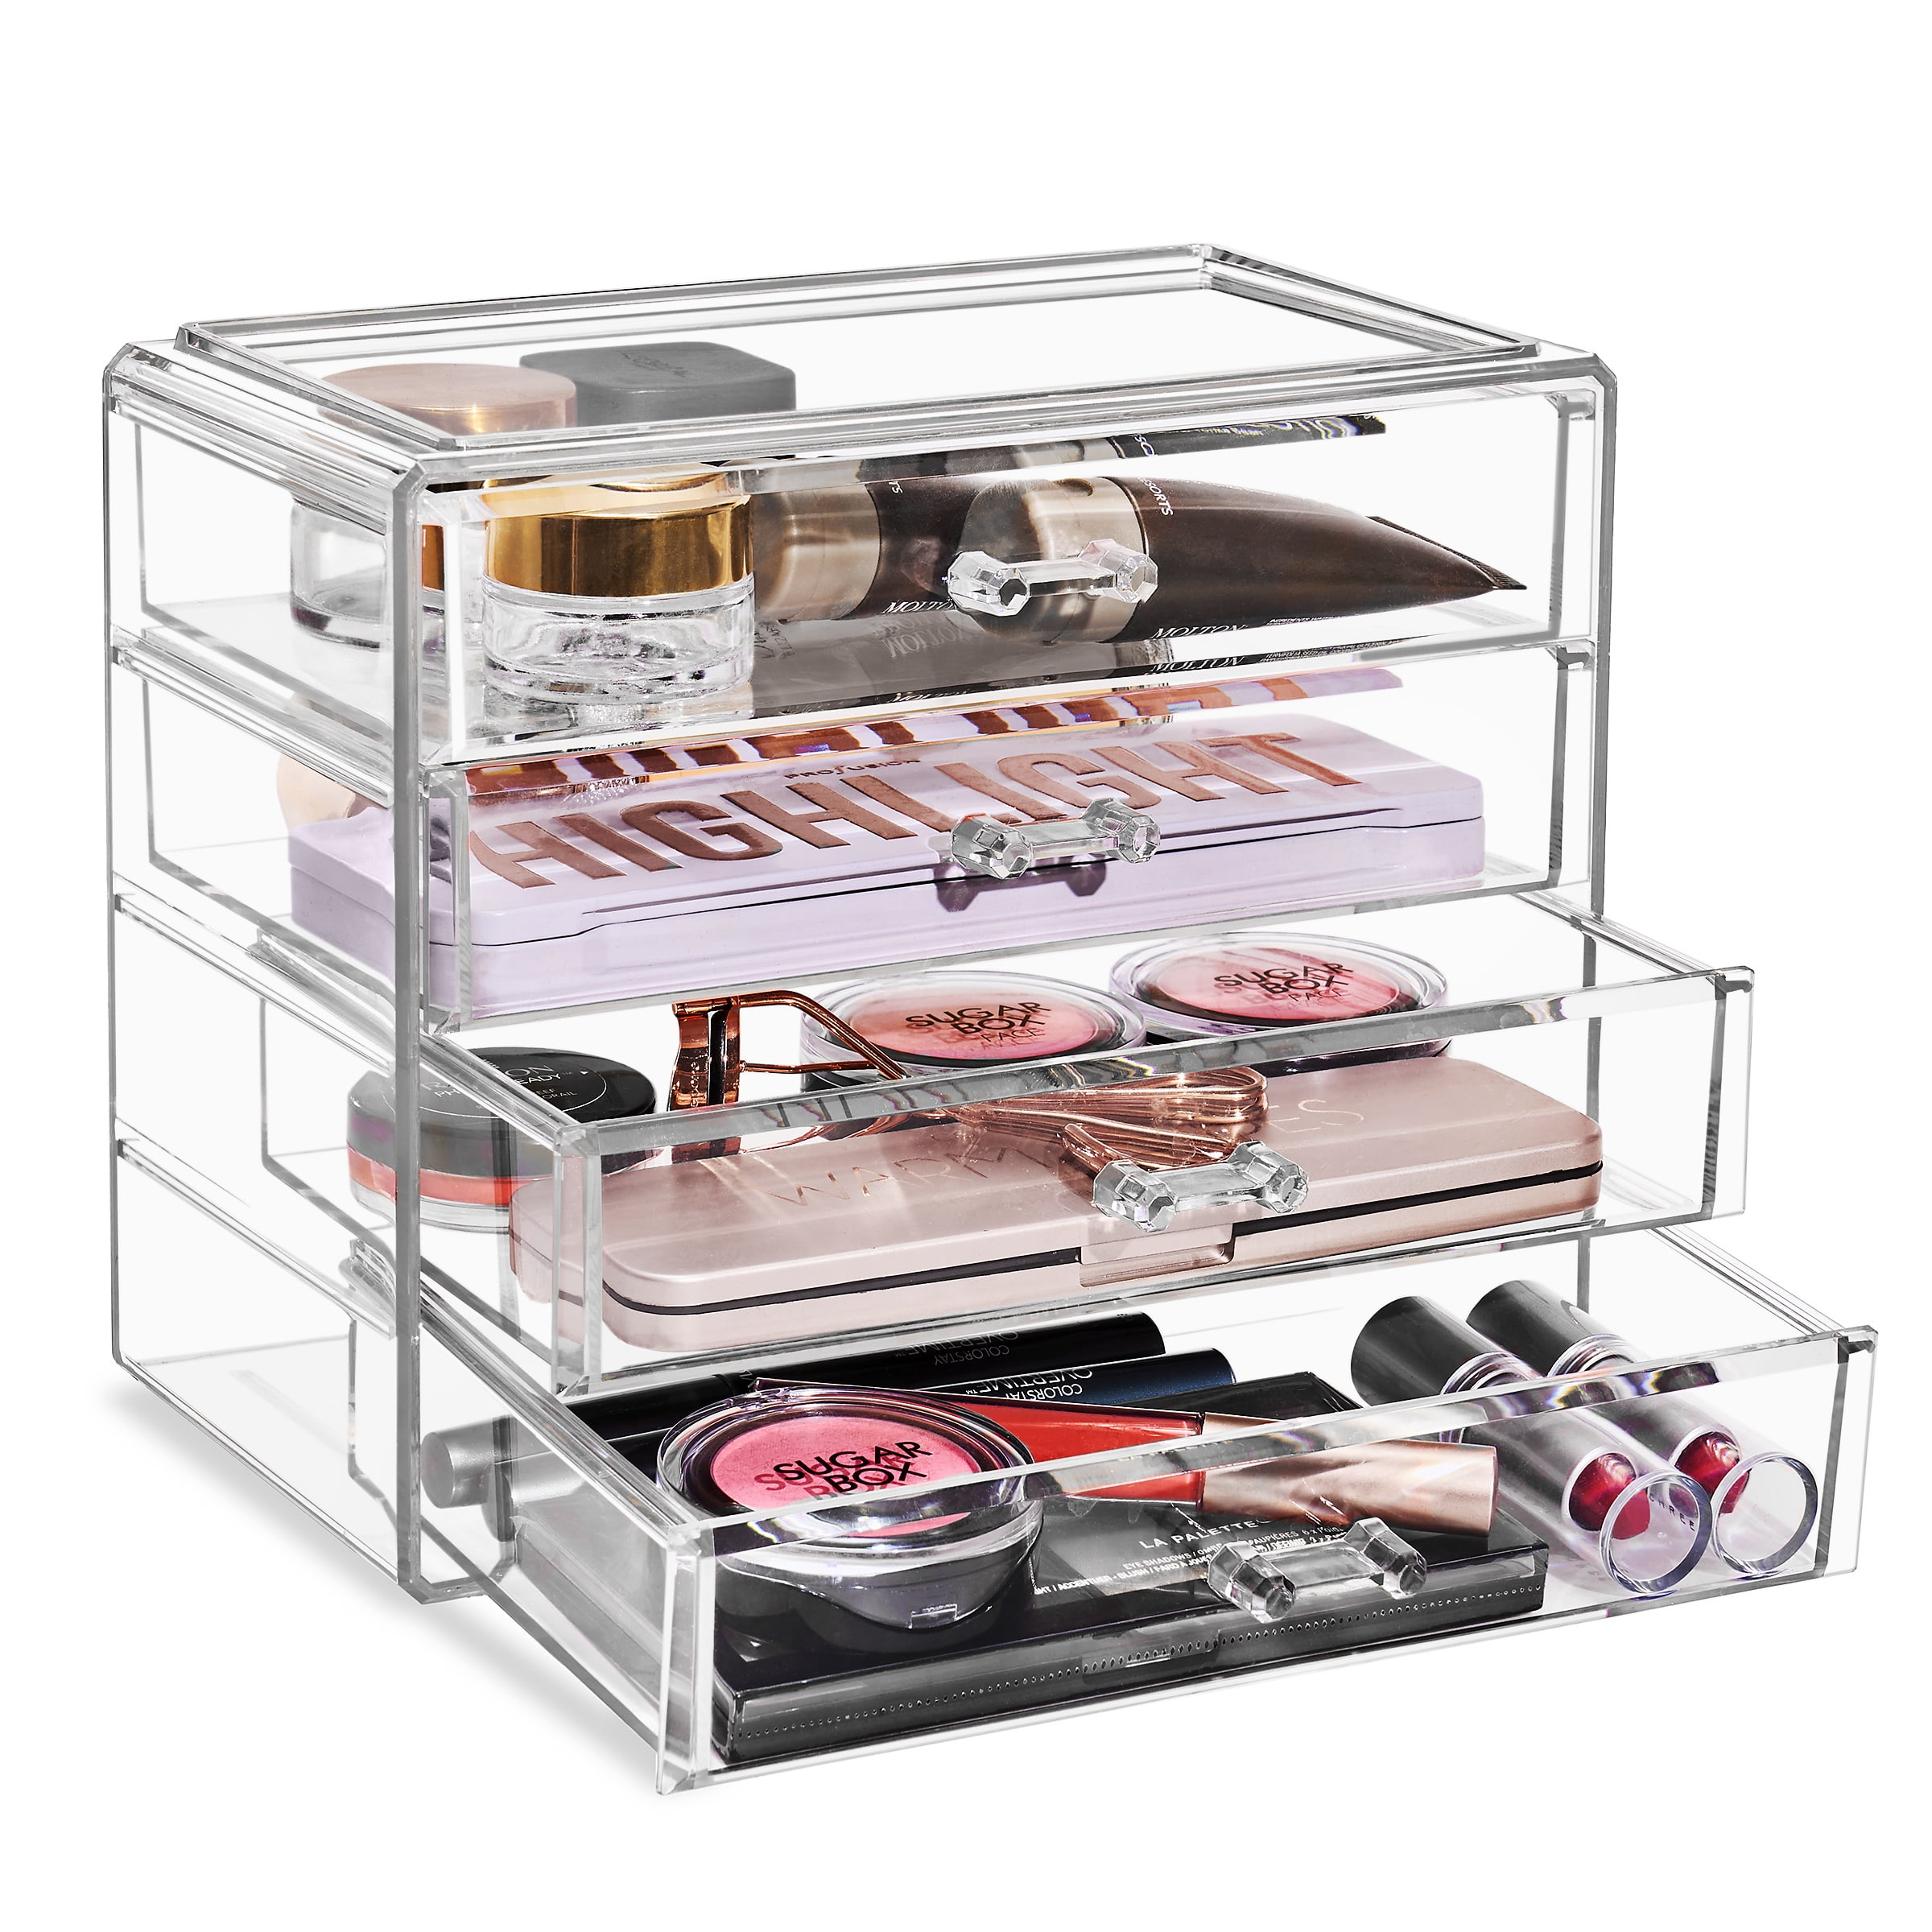 Grape tørst build Sorbus Acrylic Cosmetics Makeup and Jewelry Storage Case Display - 4 Large  Drawers -Space- Saving, Stylish Acrylic Bathroom Case Great for Lipstick,  Eye Liner, Nail Polish, Brushes, Jewelry and More - Walmart.com